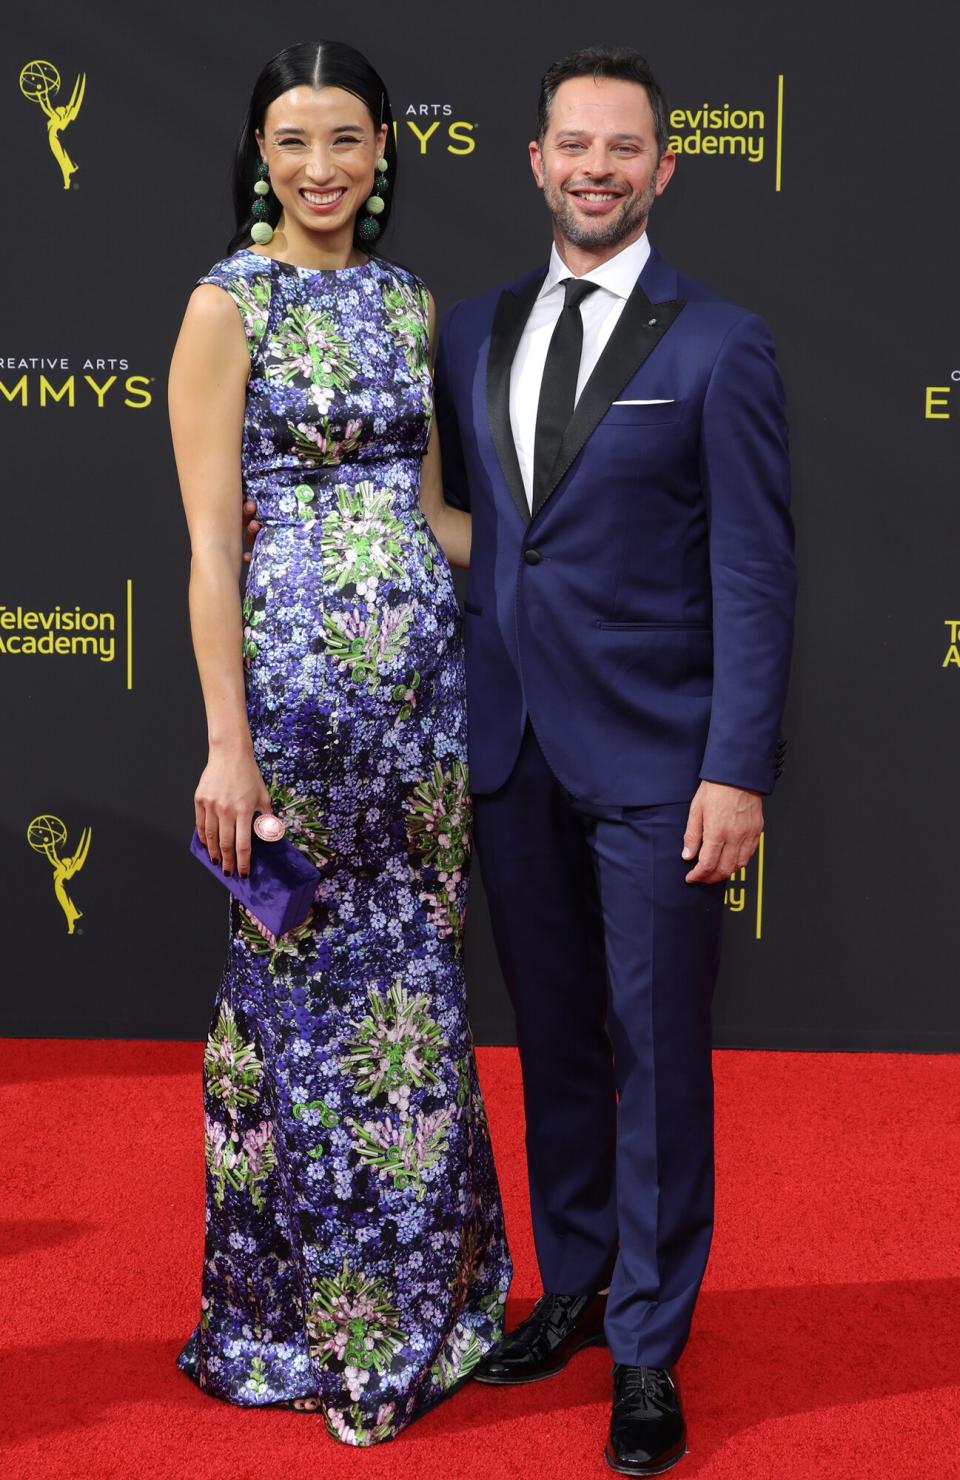 Lily Kwong and Nick Kroll attend the 2019 Creative Arts Emmy Awards on September 14, 2019 in Los Angeles, California